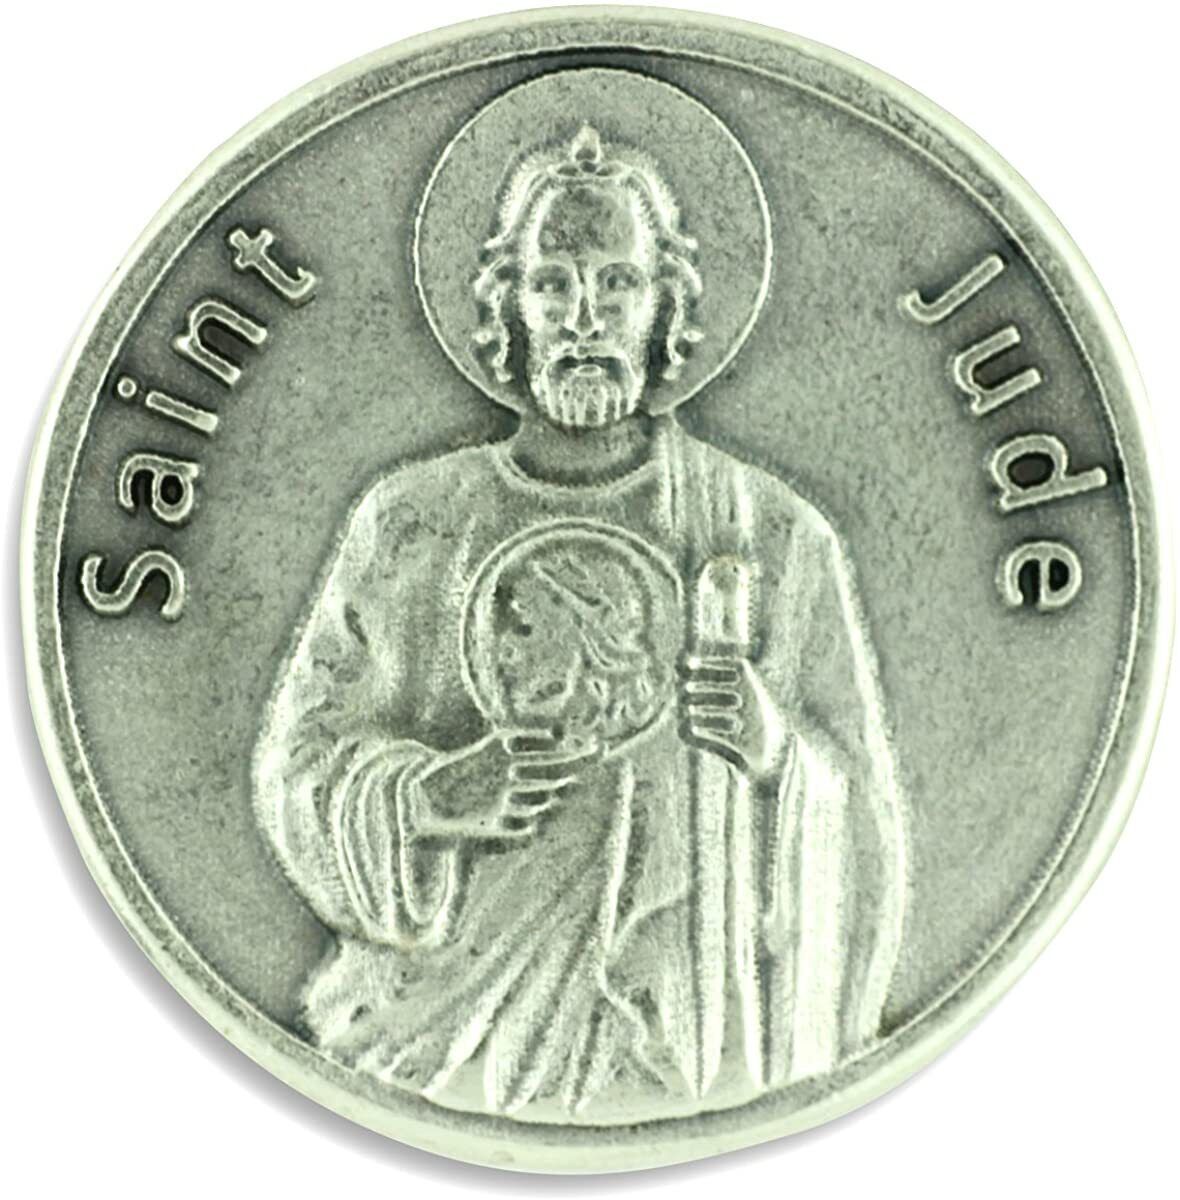 St Jude Pocket Token Patron Saint of Impossible Cases Prayer Coin